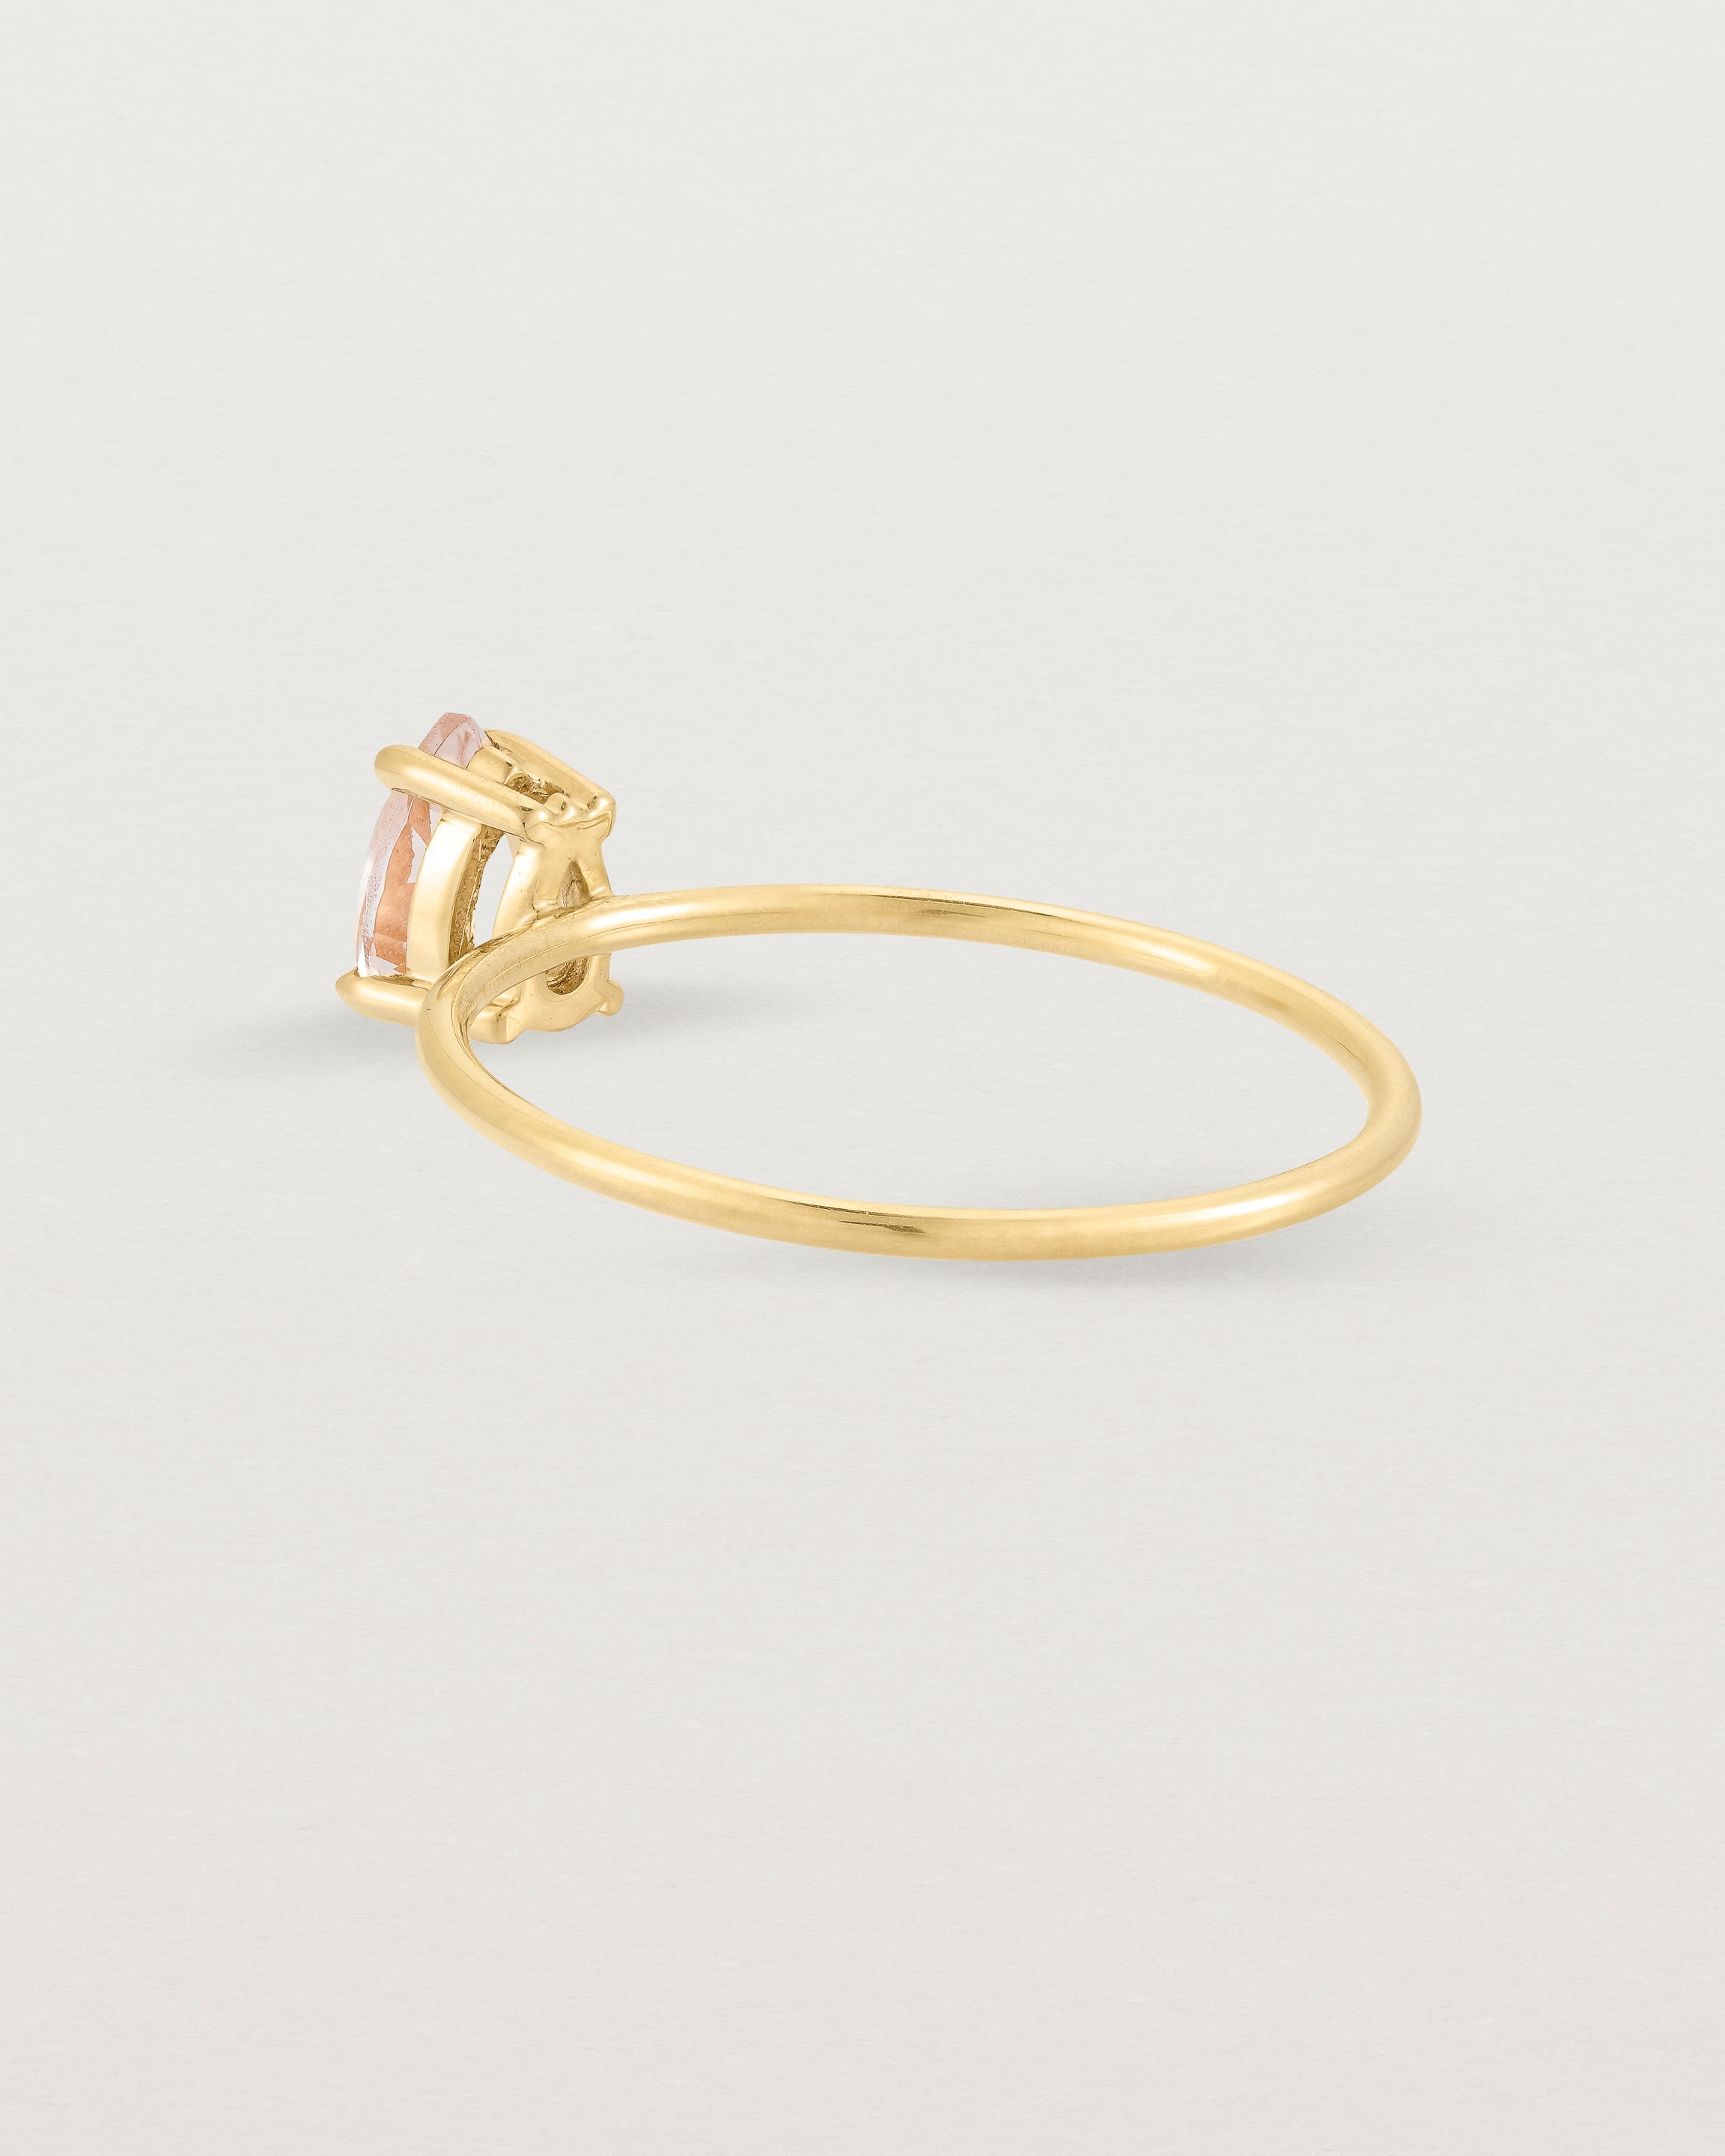 A fine yellow gold ring featuring a pear shaped pink morganite stone